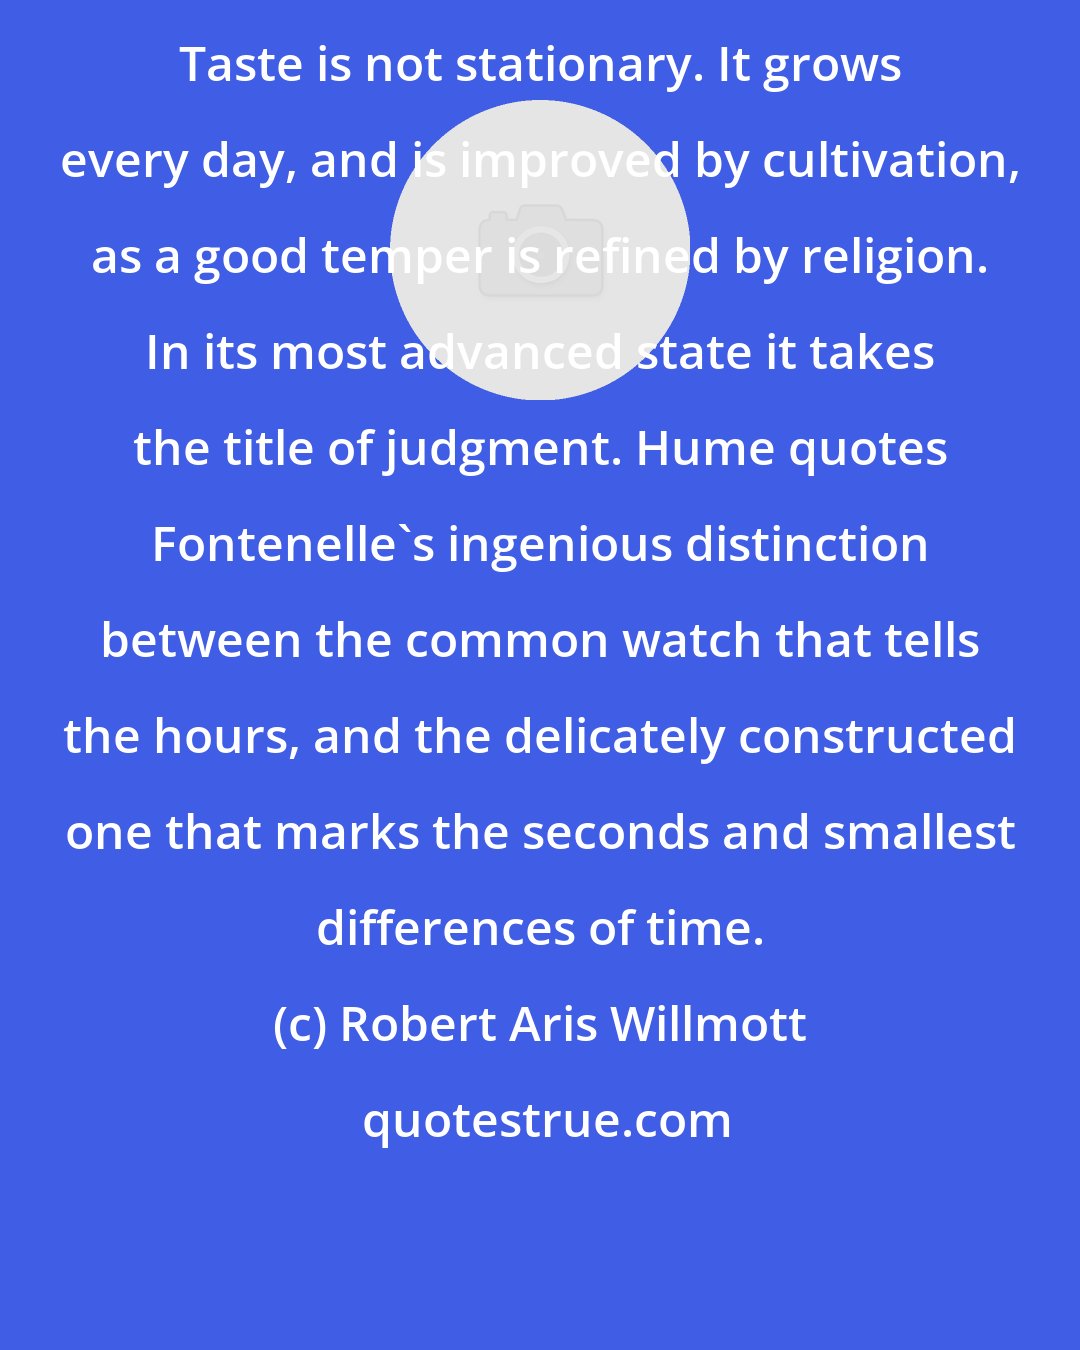 Robert Aris Willmott: Taste is not stationary. It grows every day, and is improved by cultivation, as a good temper is refined by religion. In its most advanced state it takes the title of judgment. Hume quotes Fontenelle's ingenious distinction between the common watch that tells the hours, and the delicately constructed one that marks the seconds and smallest differences of time.